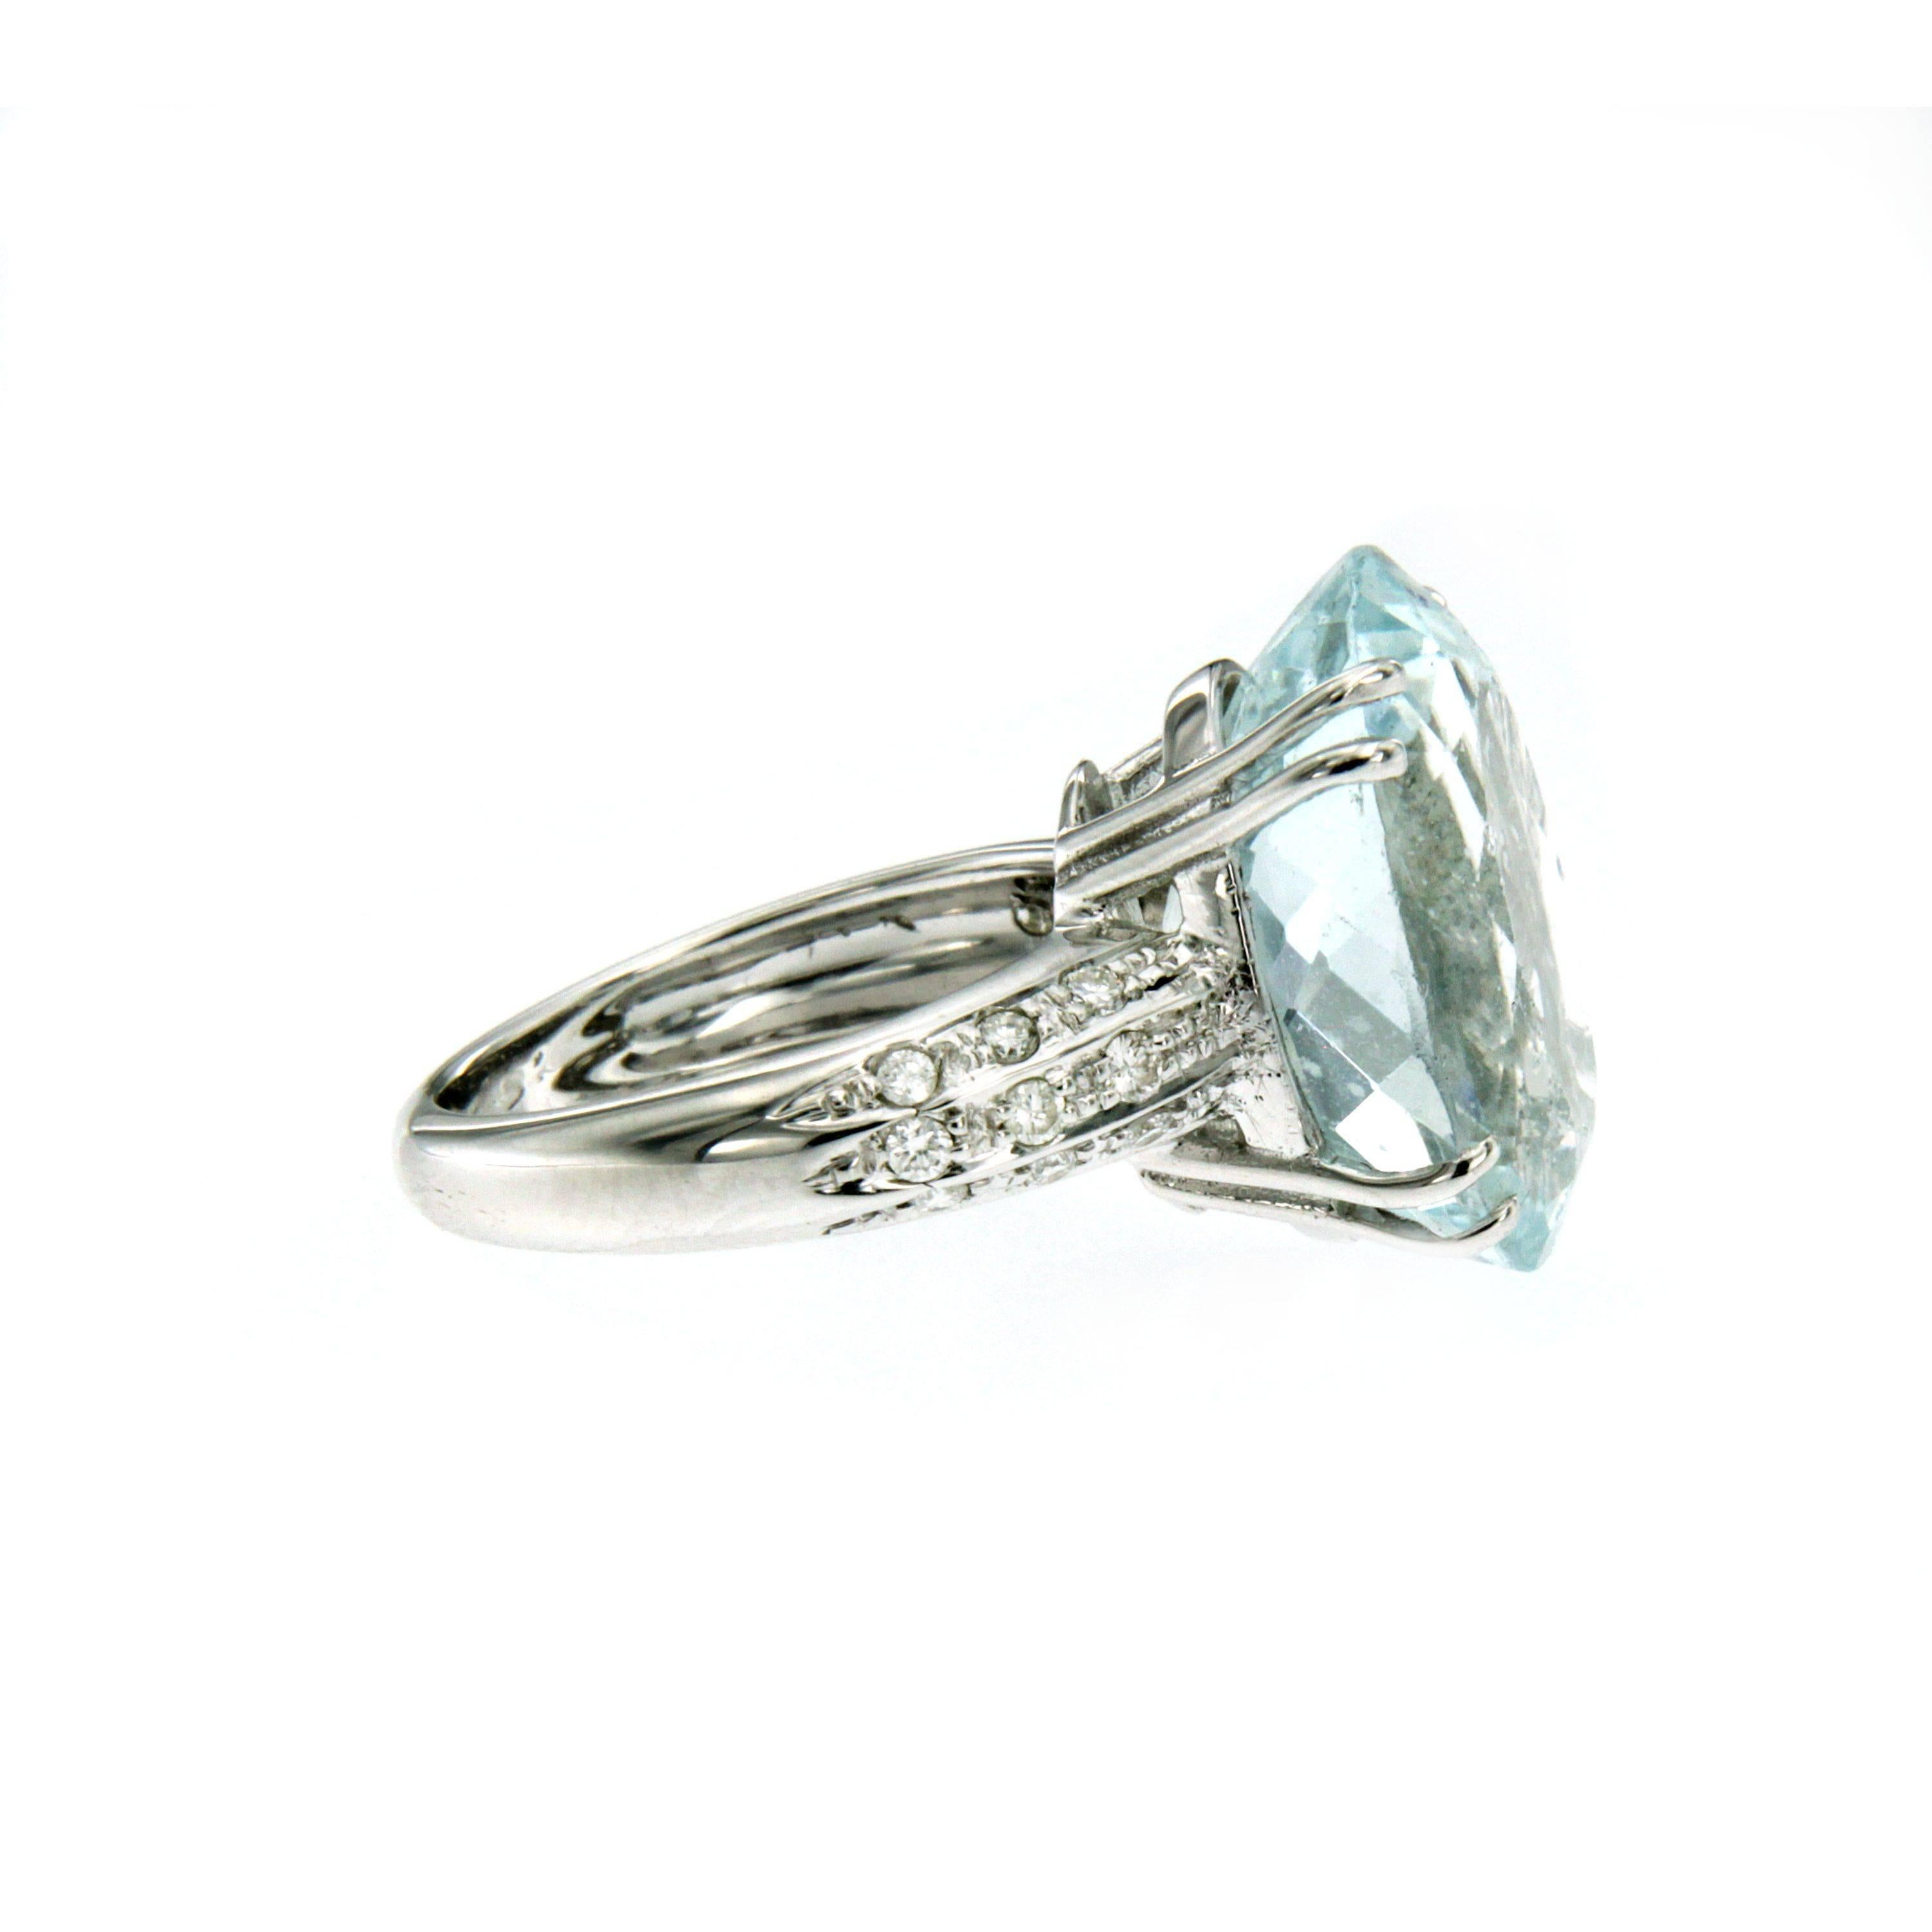 18k Gold Ring set with a natural Aquamarine weighing 5 ct and surrounded by 0.30 carat of round brilliant cut sparkling Diamonds graded G color IF clarity. Circa 1970

CONDITION: Pre-owned - Excellent 
METAL: 18k White Gold 
GEM STONE: Aquamarine 5